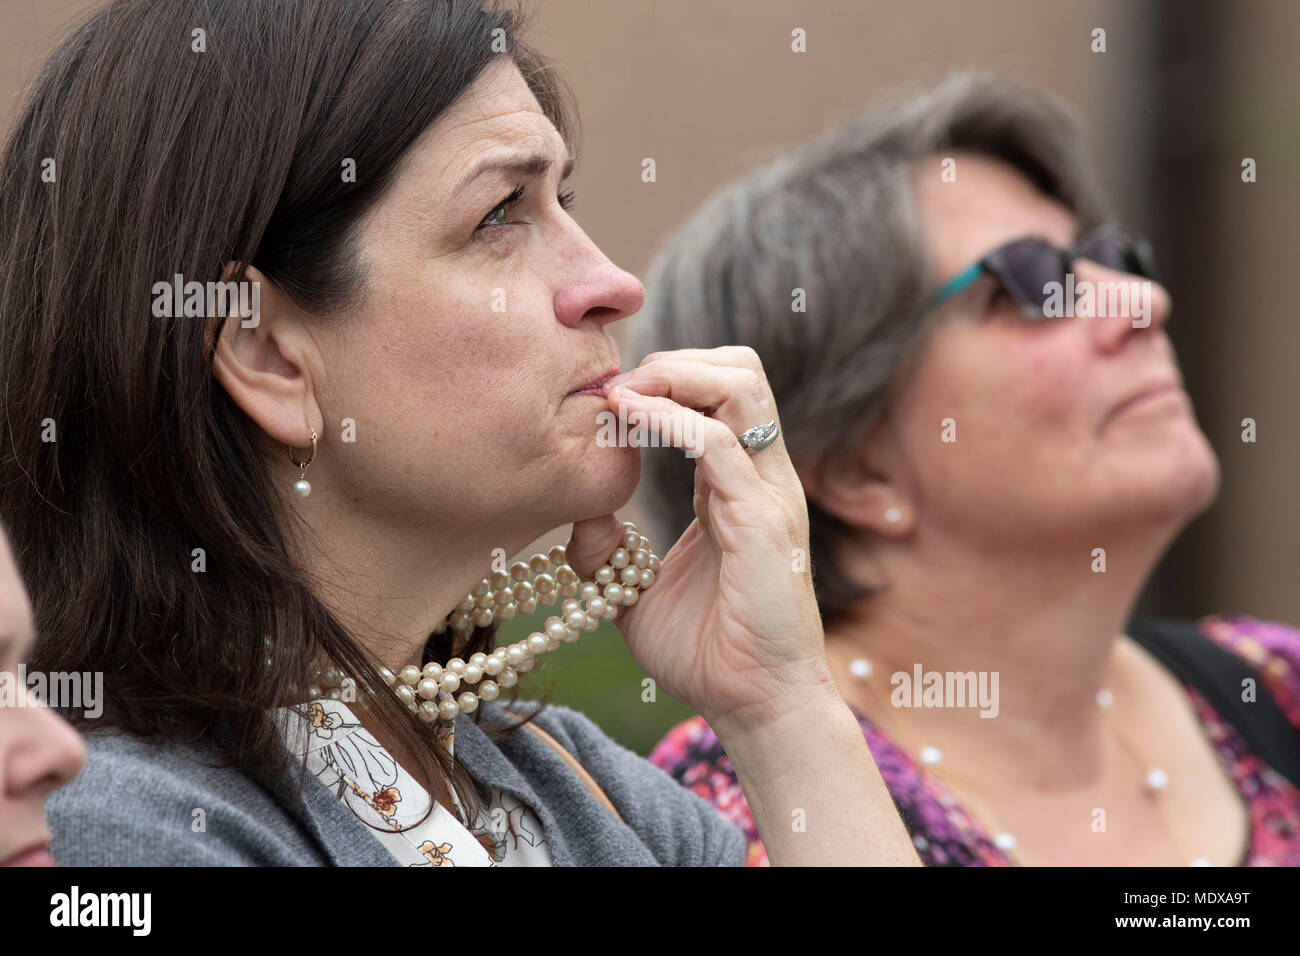 Mourners wear pearls in honor of Barbara Bush, who made pearl chokers a regular part of her wardrobe, as they pay respects to the former First Lady at S. Martin's Episcopal Church in Houston Stock Photo